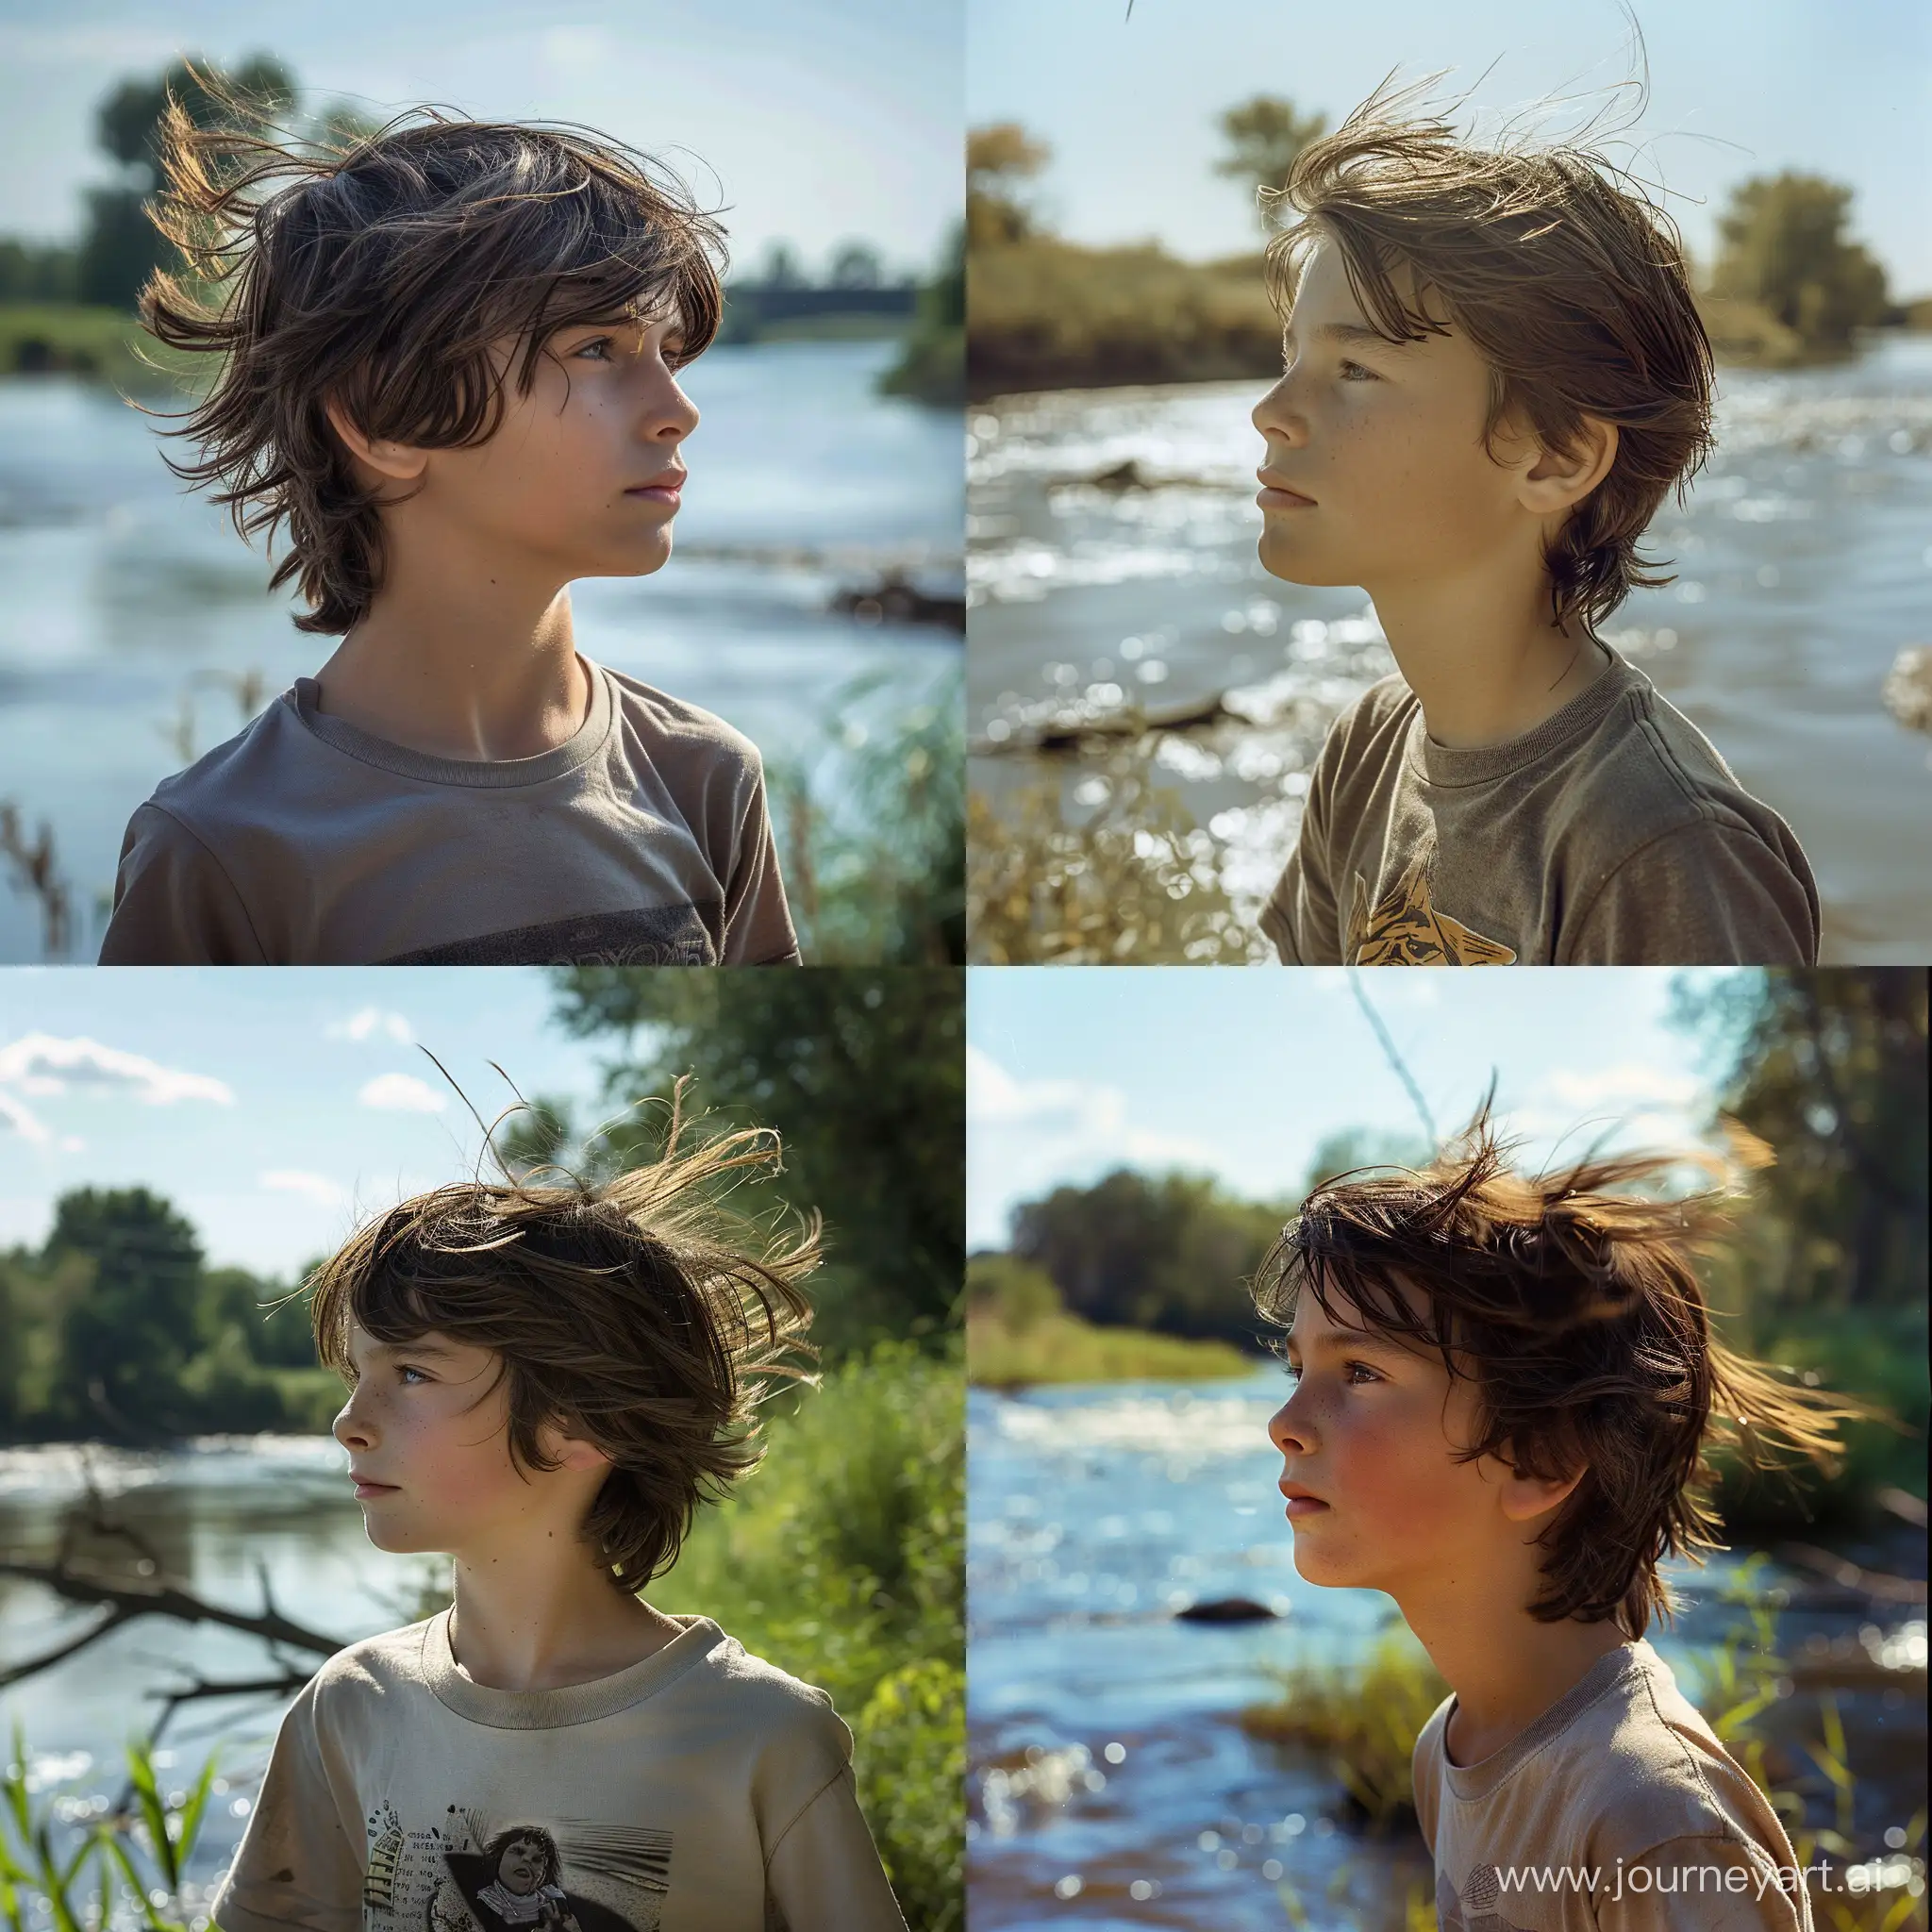 Adventurous-12YearOld-Boy-by-the-Riverside-on-a-Sunny-Day